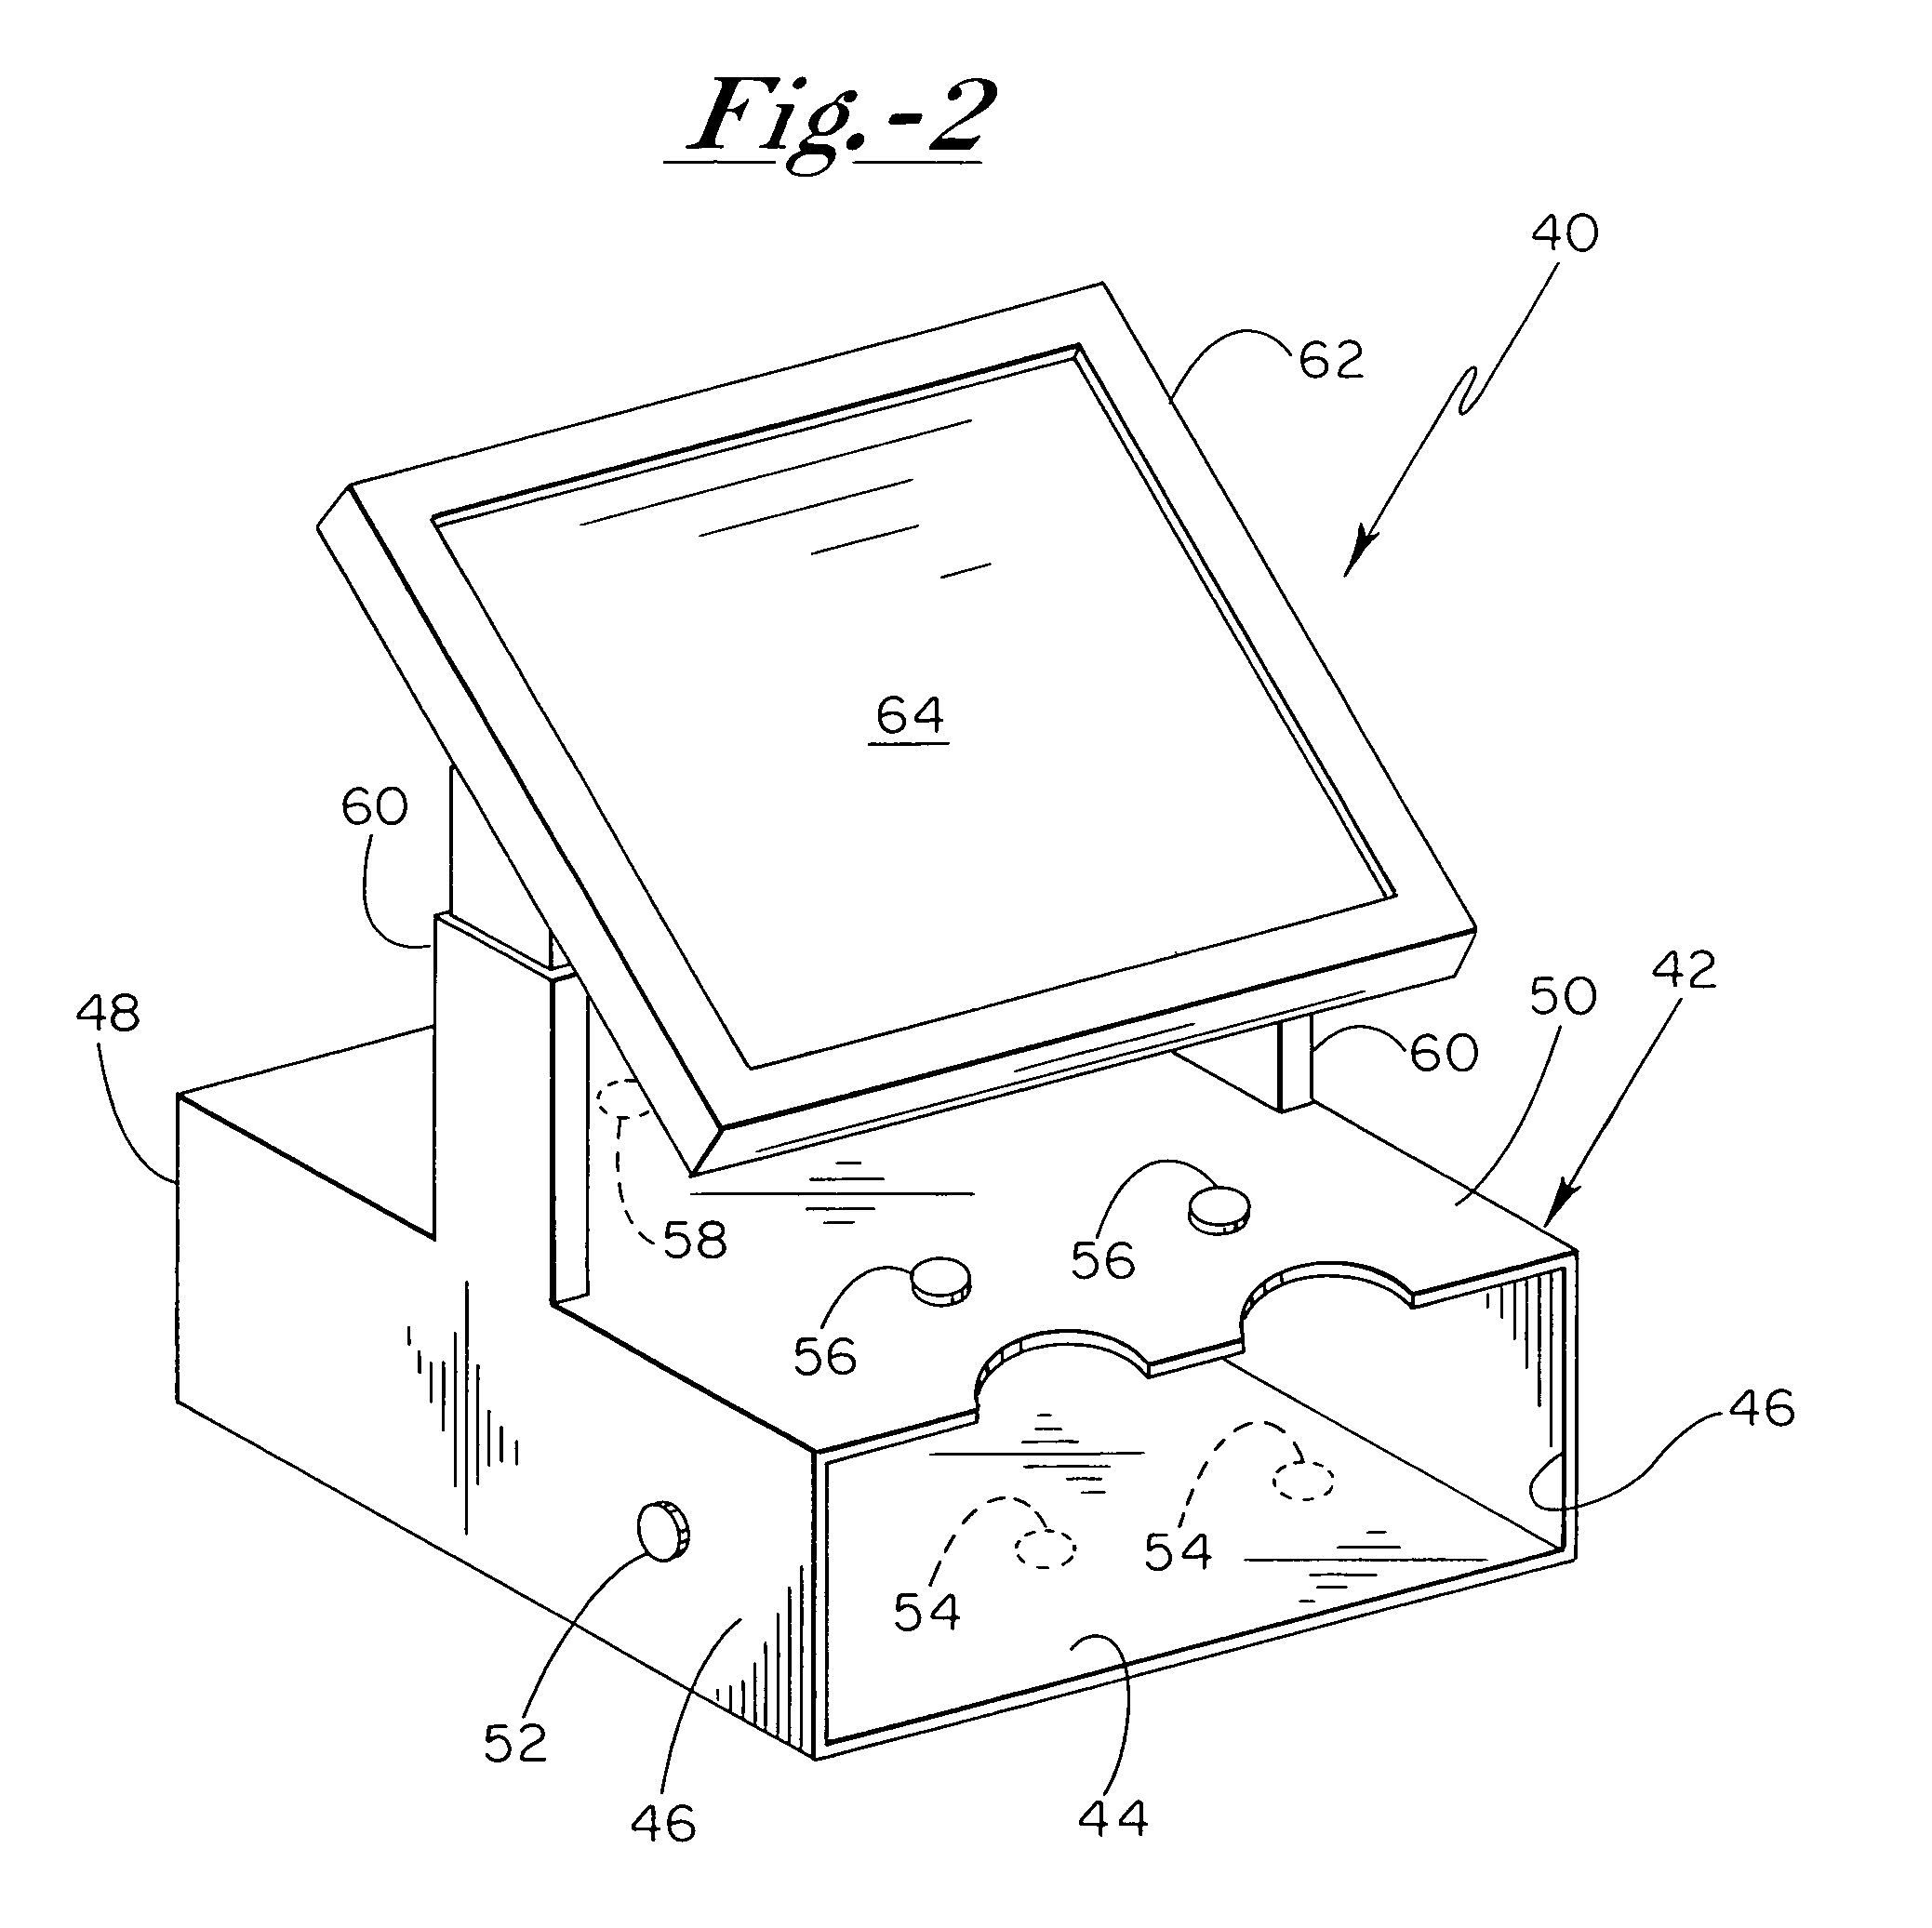 Apparatus and method for "seeing" foot inside of shoe to determine the proper fit of the shoe